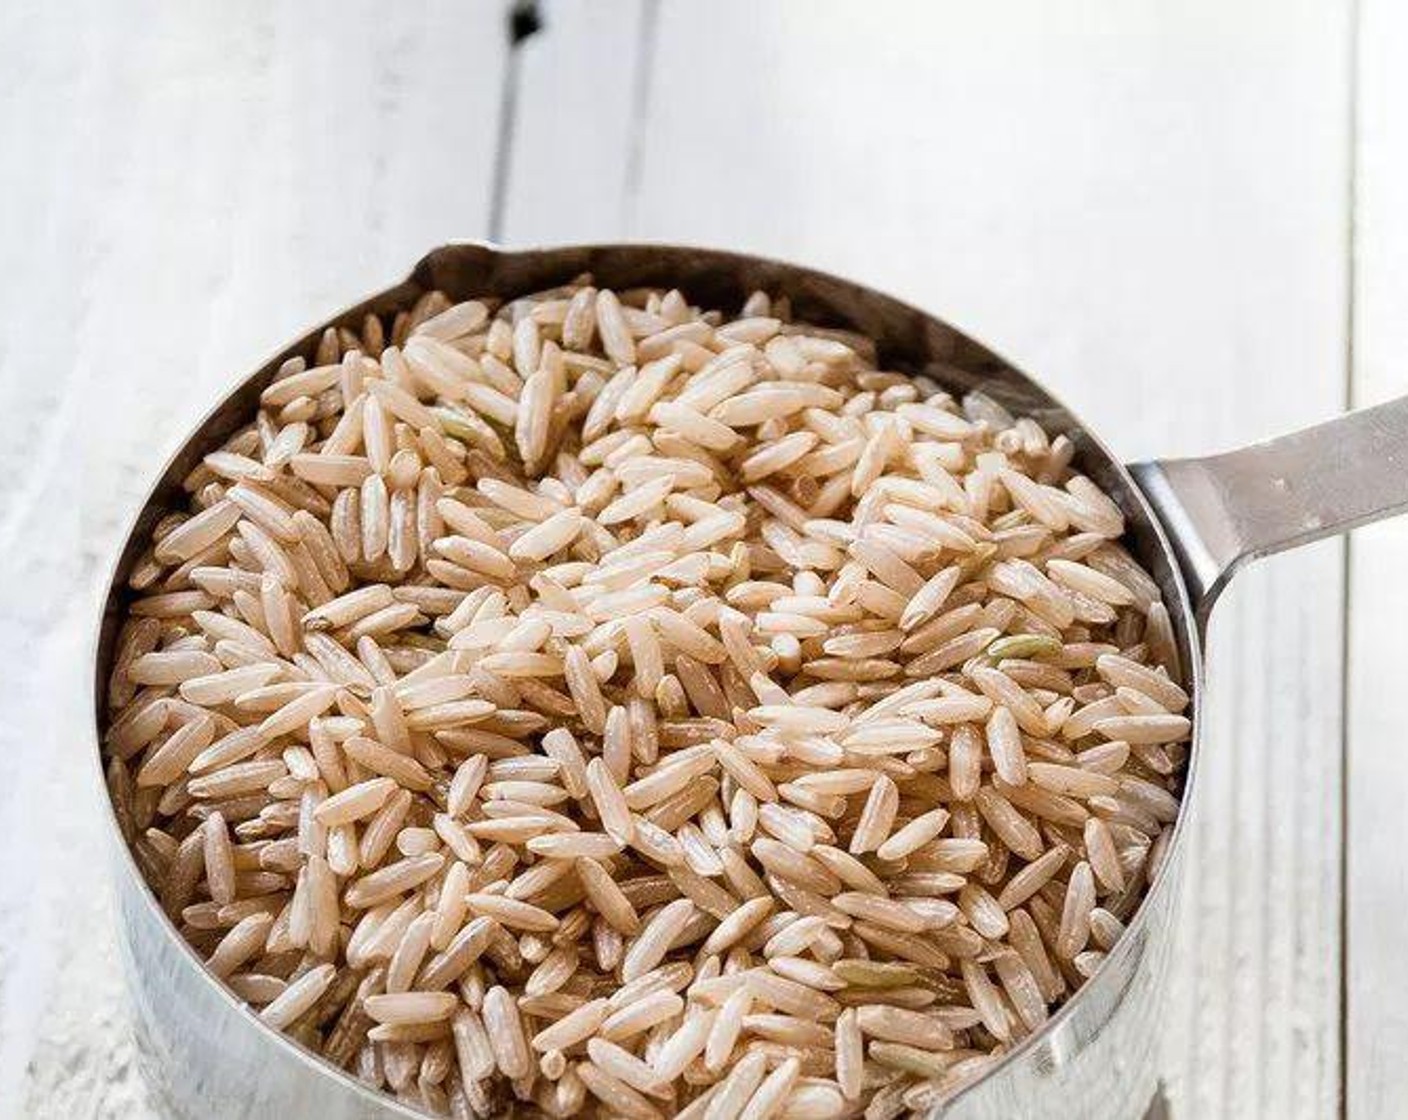 step 1 Combine Mahatma® 100% Whole Grain Brown Rice (1 cup), Chicken Stock (1 cup), and Water (1 cup) in a medium pot. Bring to a boil and let simmer for 30 minutes or until water is absorbed and rice is tender.